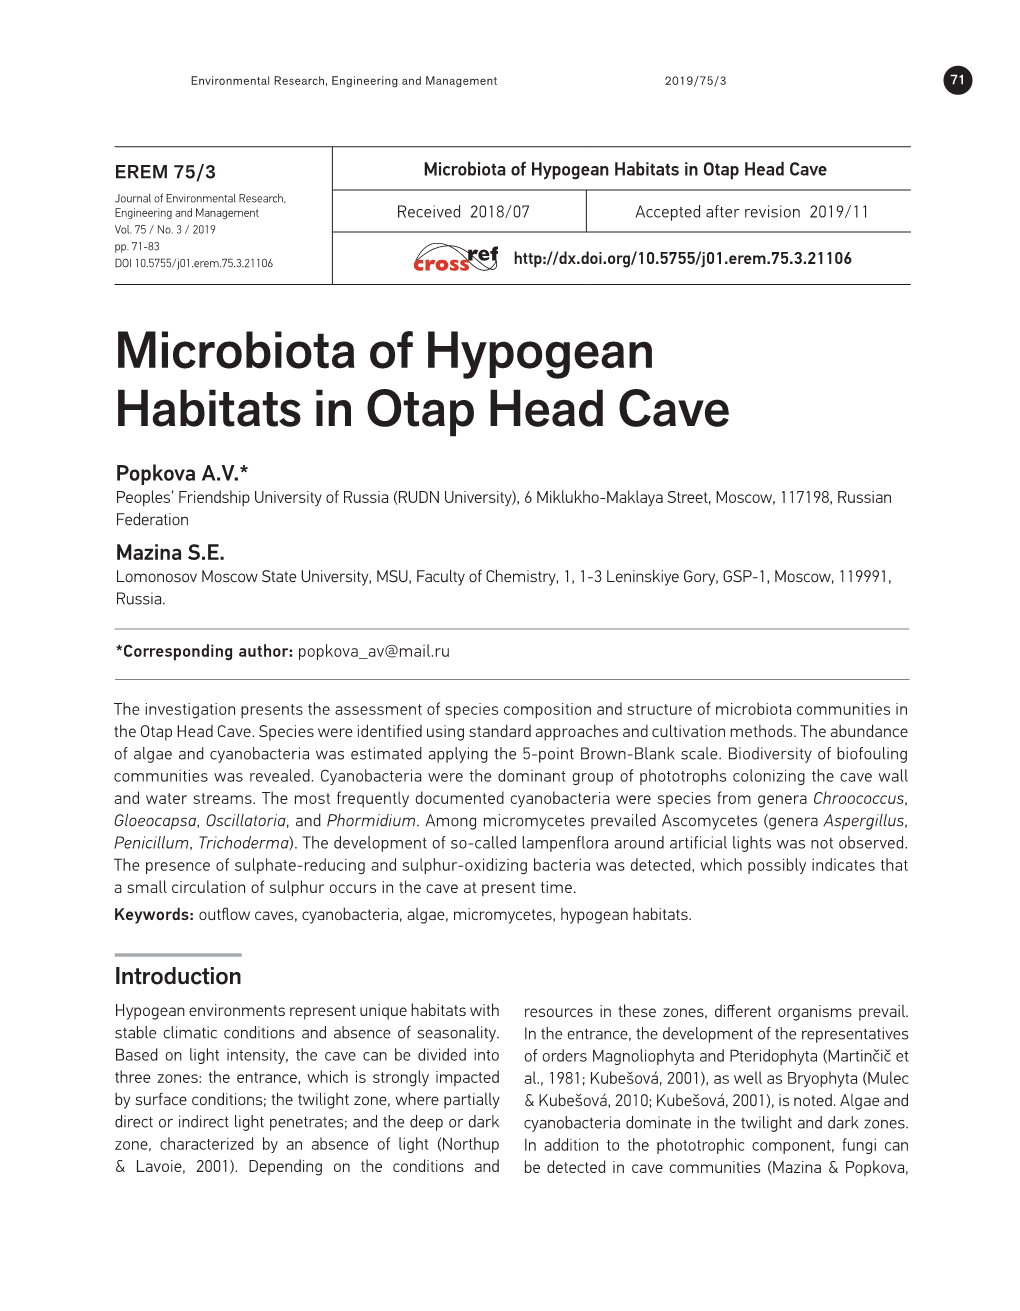 Microbiota of Hypogean Habitats in Otap Head Cave Journal of Environmental Research, Engineering and Management Received 2018/07 Accepted After Revision 2019/11 Vol